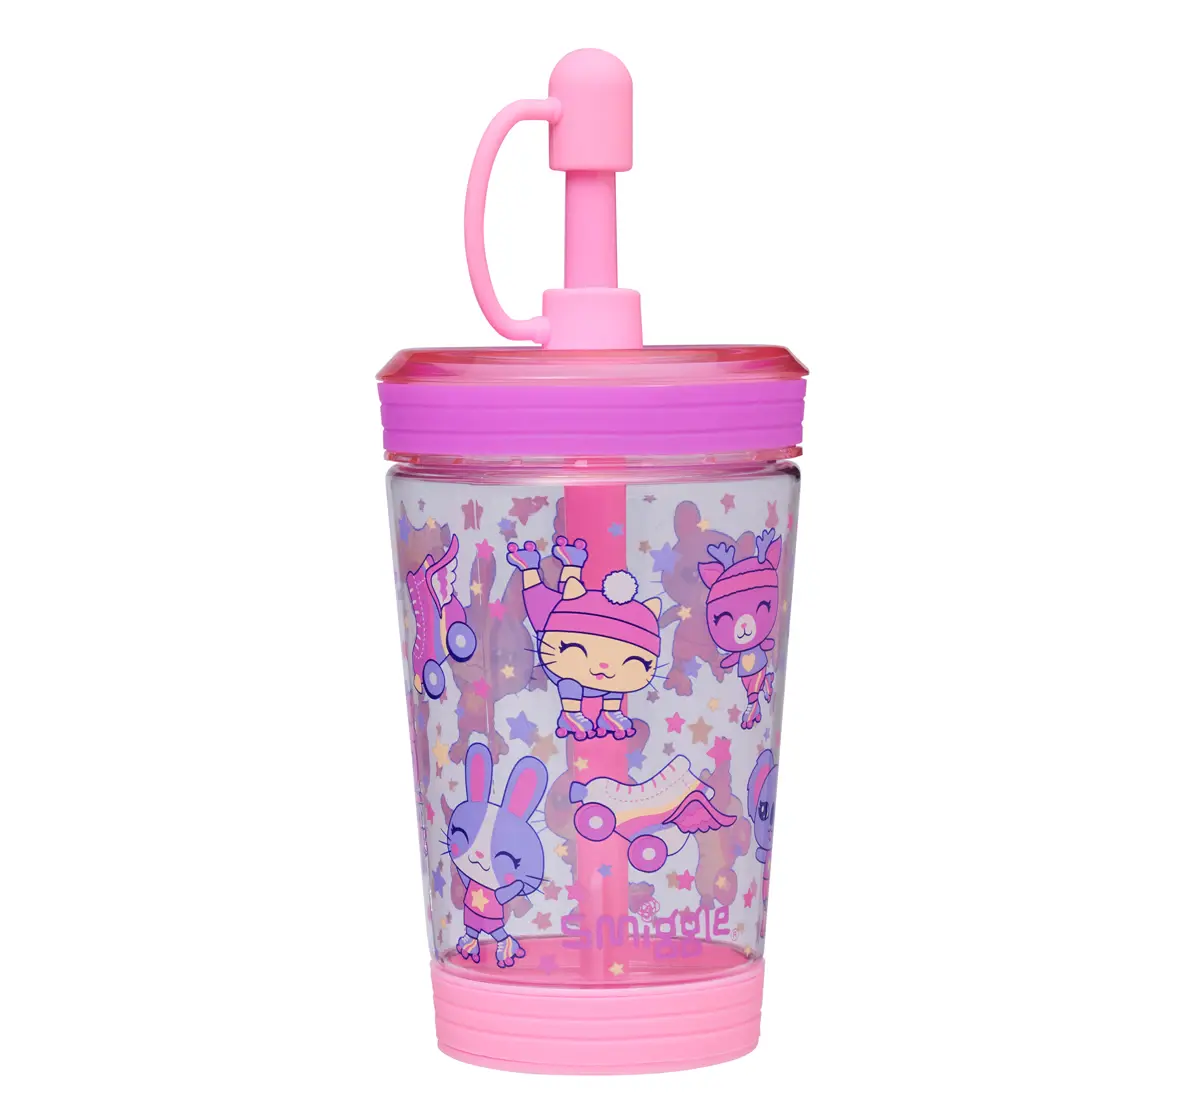 Smiggle Movin' No Spill Cup, Pink, 3Y+